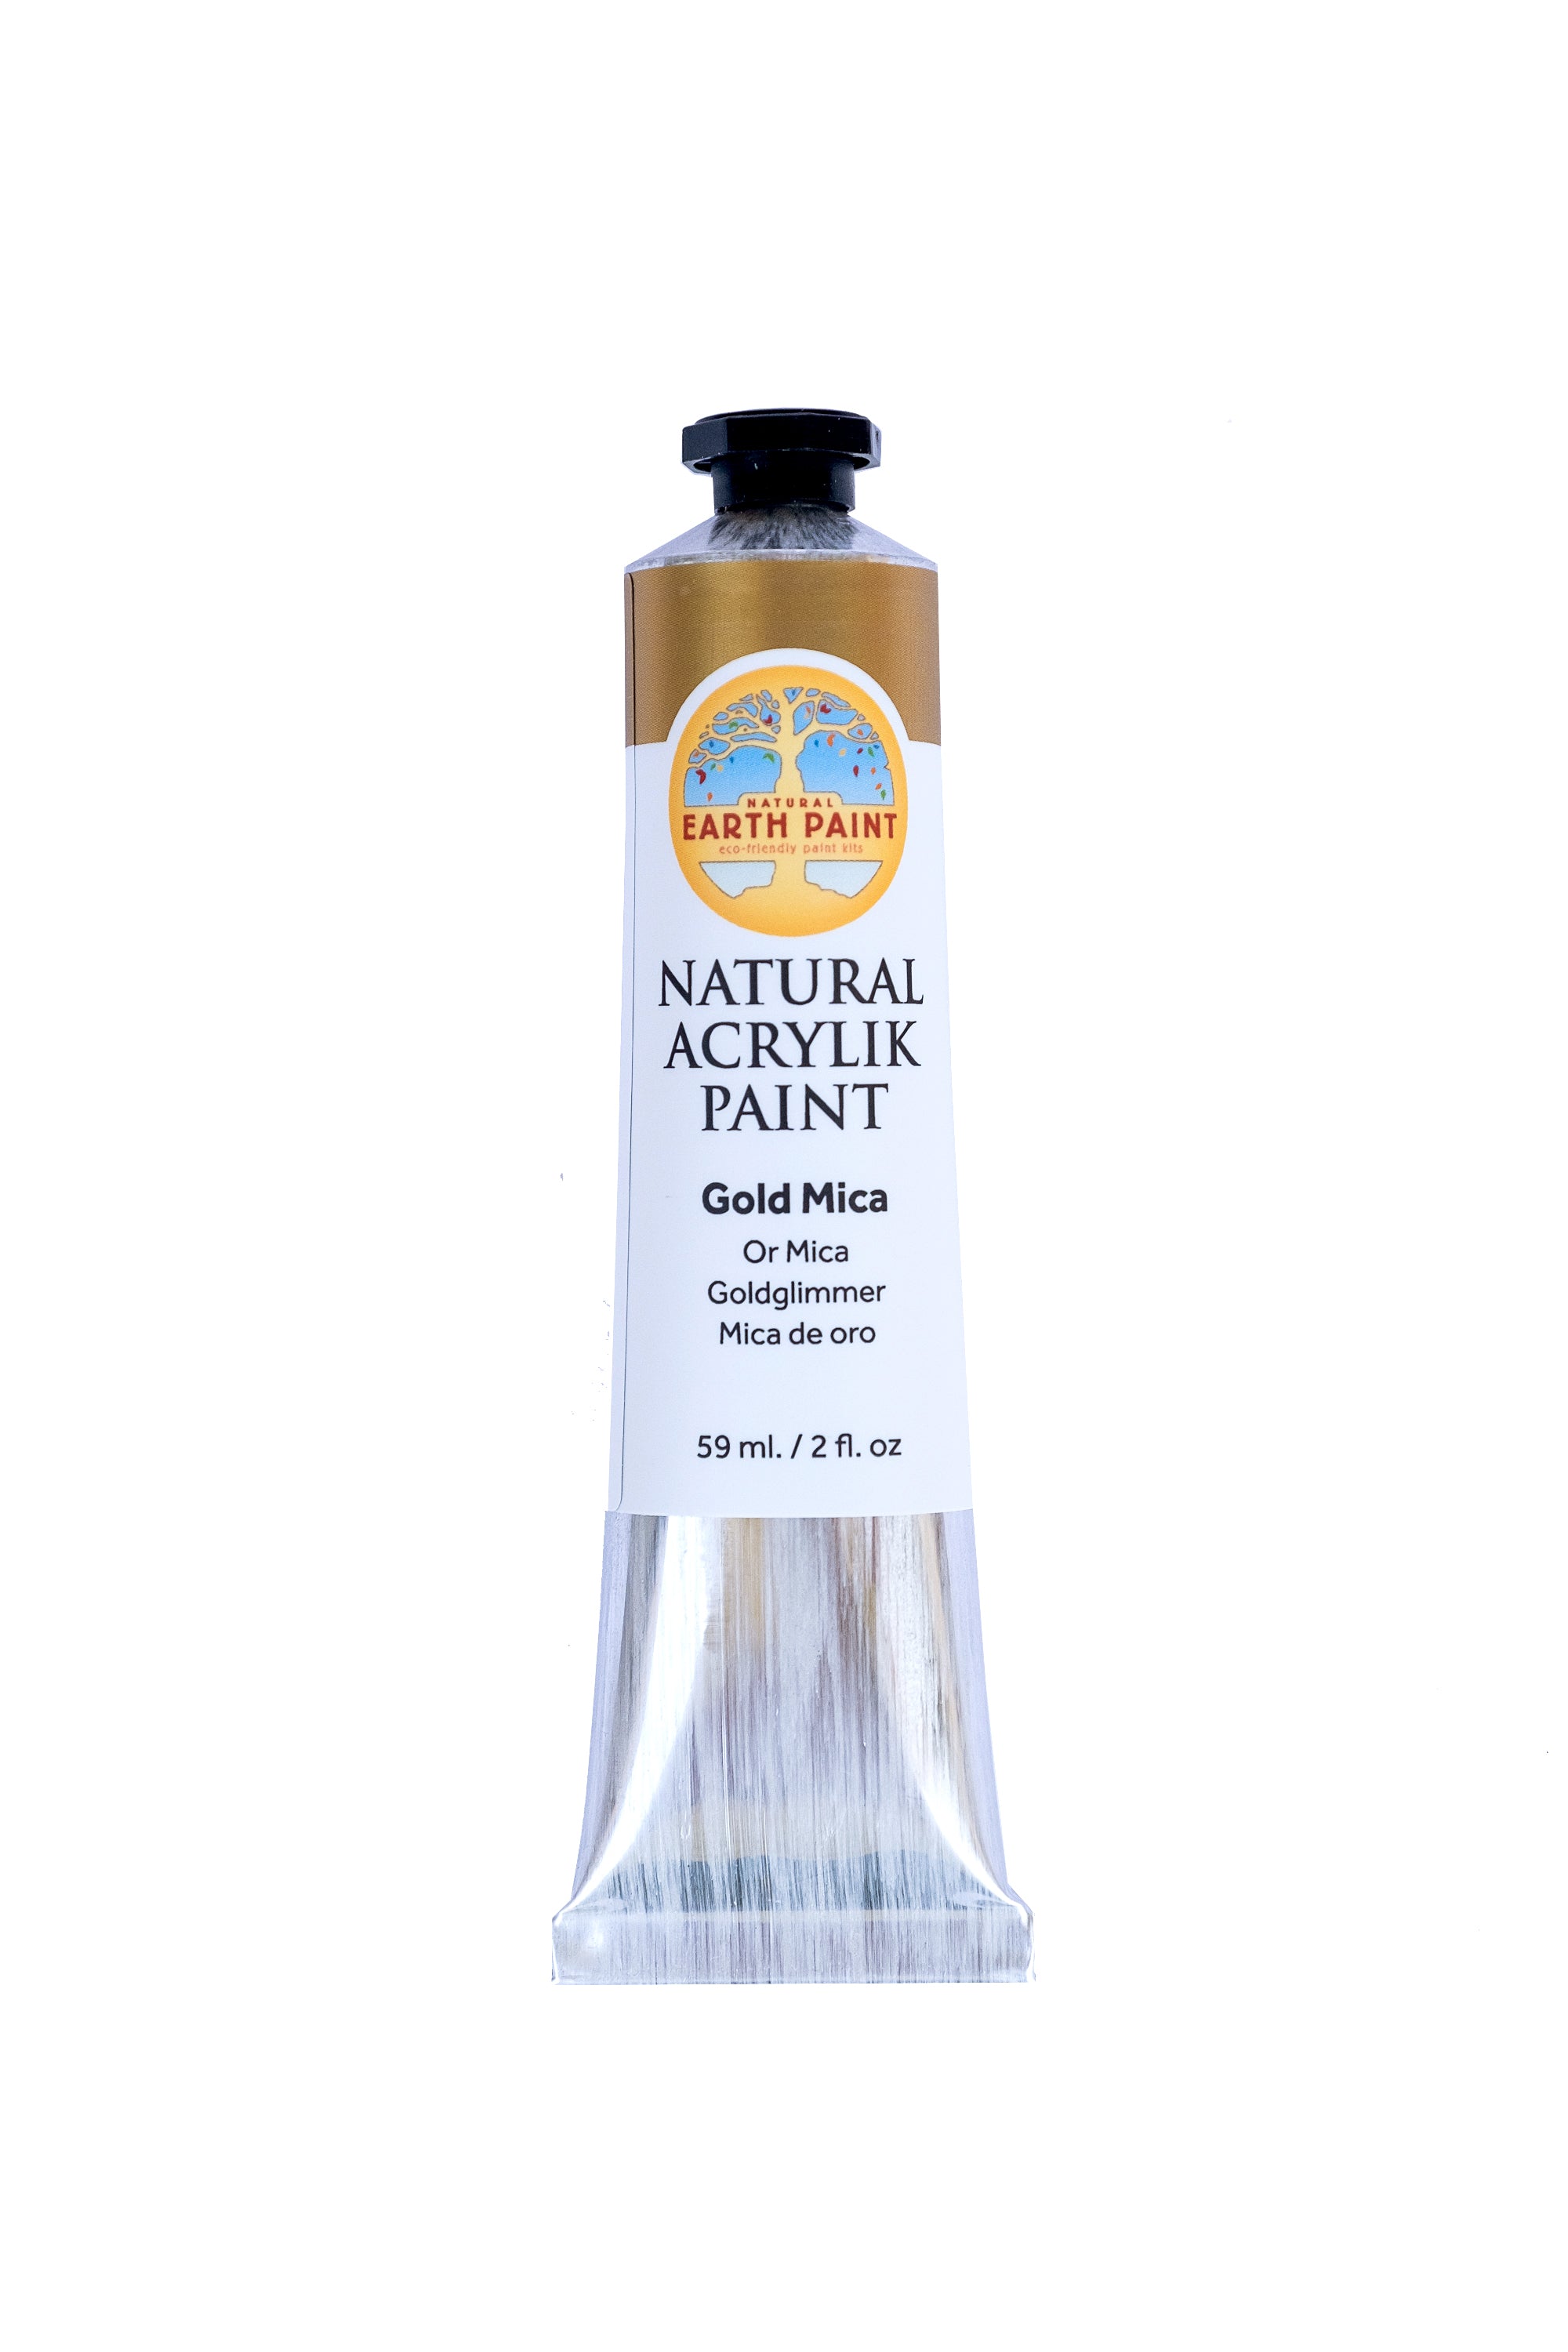 Natural Acrylik Paint™ - Individual Tubes-acrylic, acrylic paint, art, arts and craft, colors from the earth, earth colors, earth paint, earth pigments, eco art supplies, Eco Artist Paints, eco friendly paints, eco-friendly art supplies, eco-friendly paint, Fine Art Supplies Products, natural acrylic, natural artist paints, natural earth colors, natural paint, natural paints, non-toxic paint, nontoxic artist paints, nontoxic artist supplies, nontoxic paints, paint, sustainable art supplies-Gold Mica-Natural